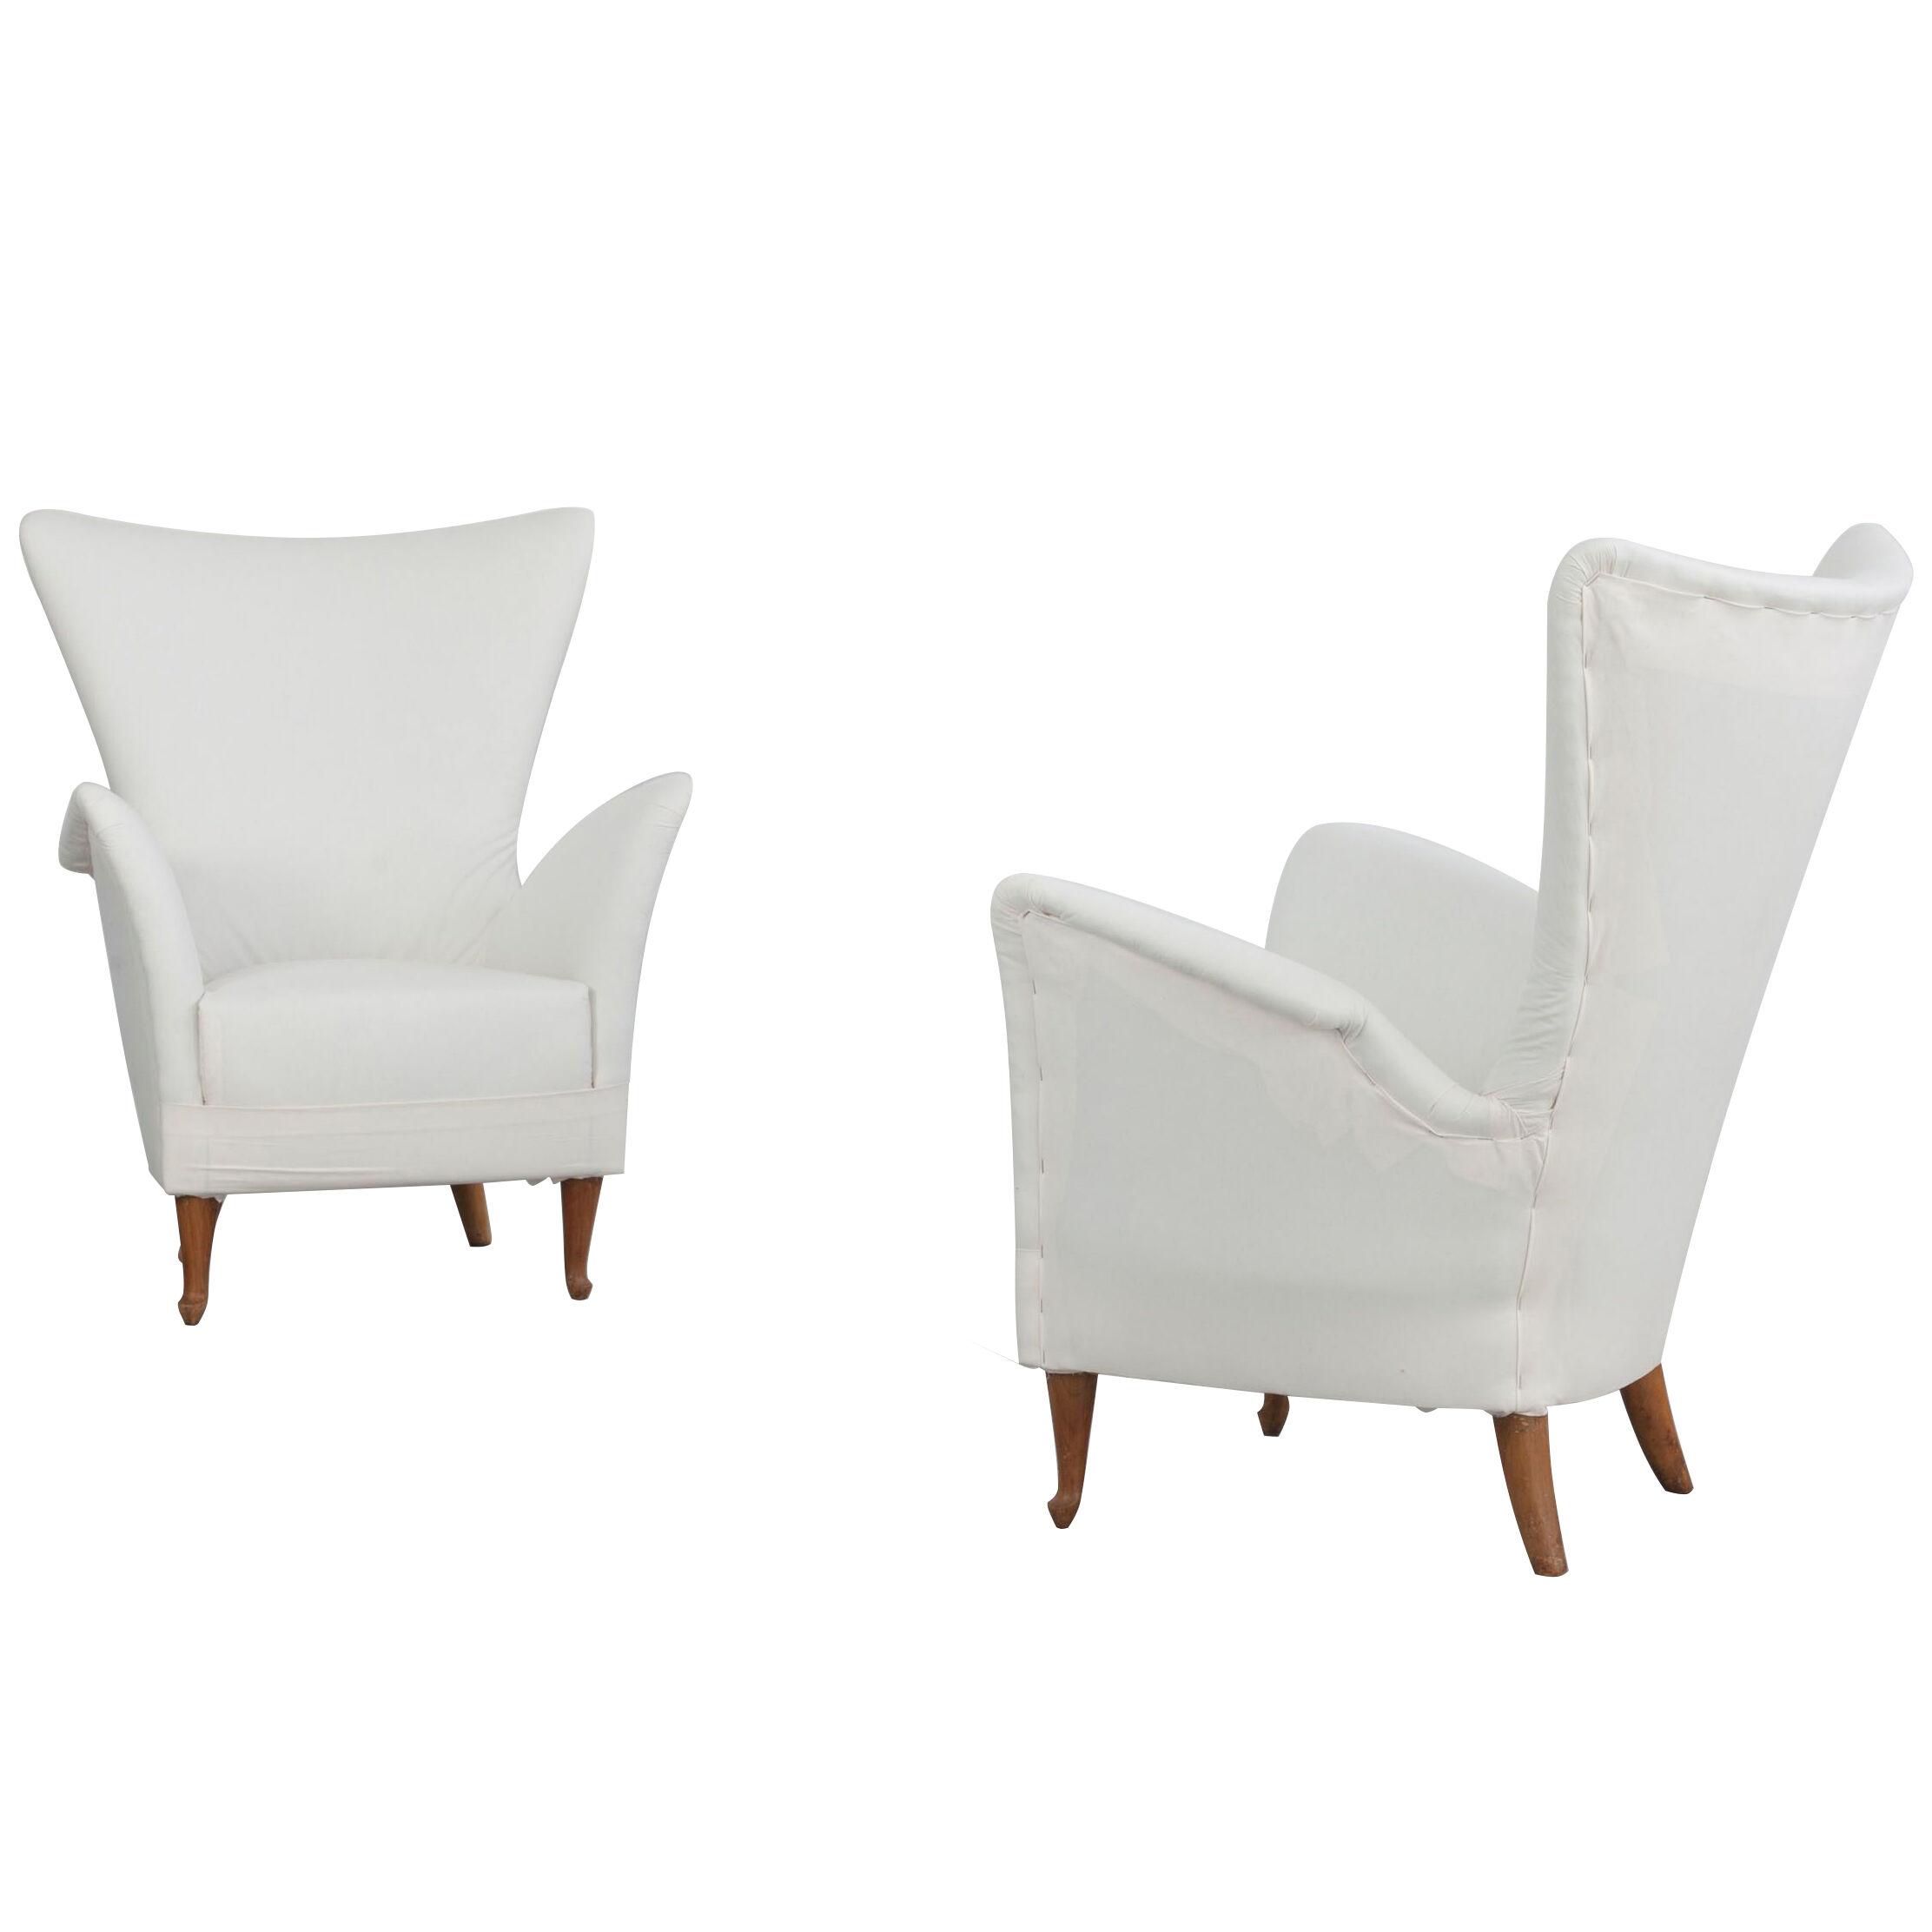 Set of Two Italian Ponti Stile Armchairs from Italy, 1950s